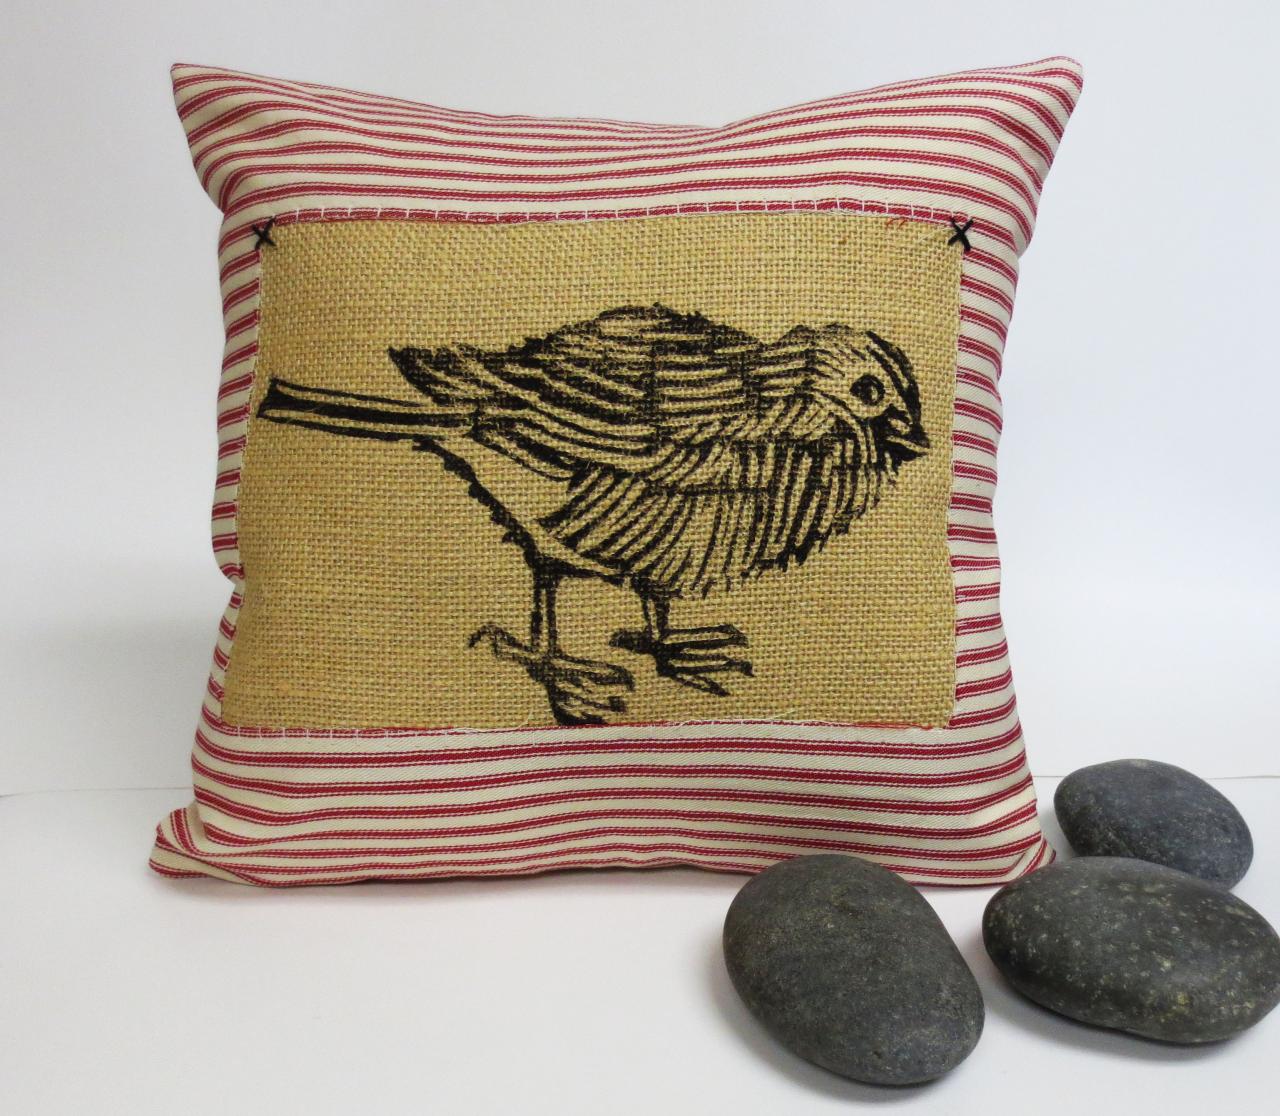 Red Ticking Stripe Pillow Cover With Sparrow Bird Block Print Over Burlap - Your Choice Of Ticking Stripe